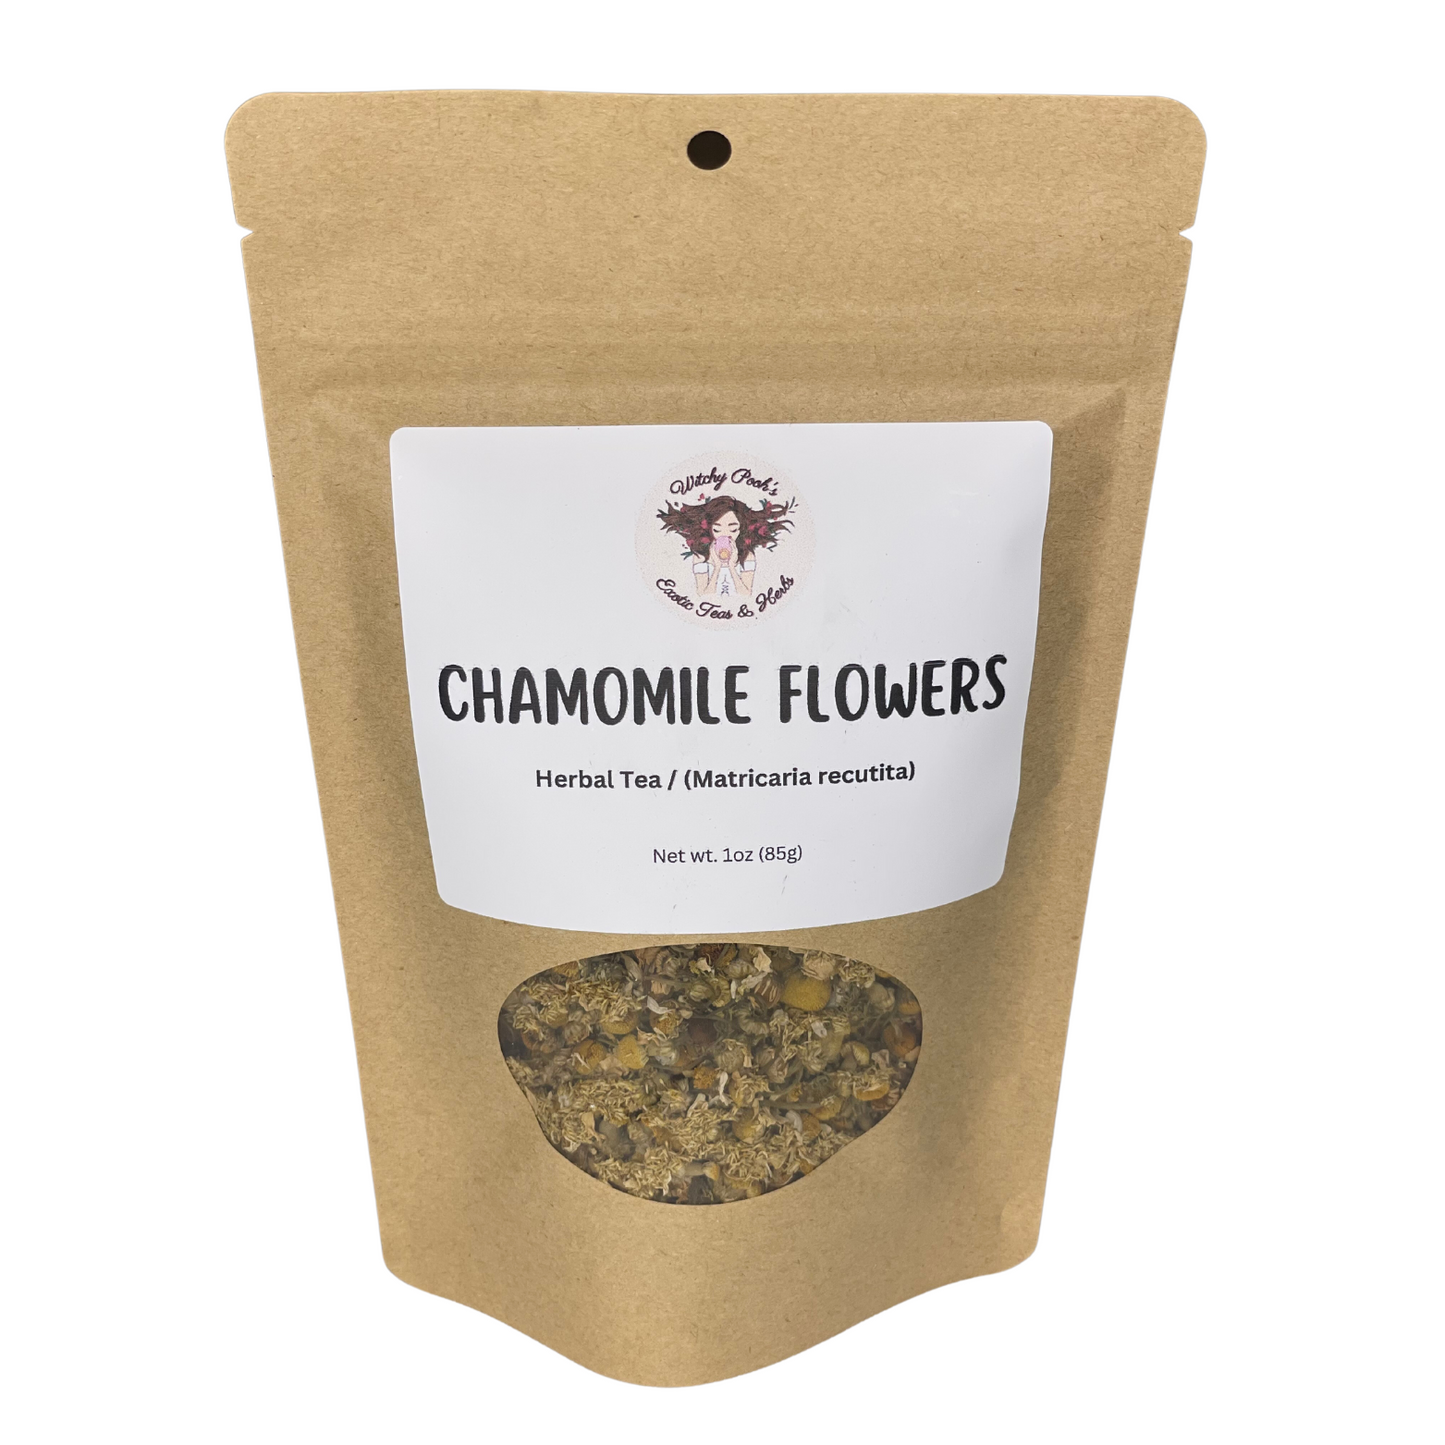 Witchy Pooh's Chamomile Flowers Loose Leaf Herbal Tea, Caffeine Free, For Stress Relief and Sleep Aid-3